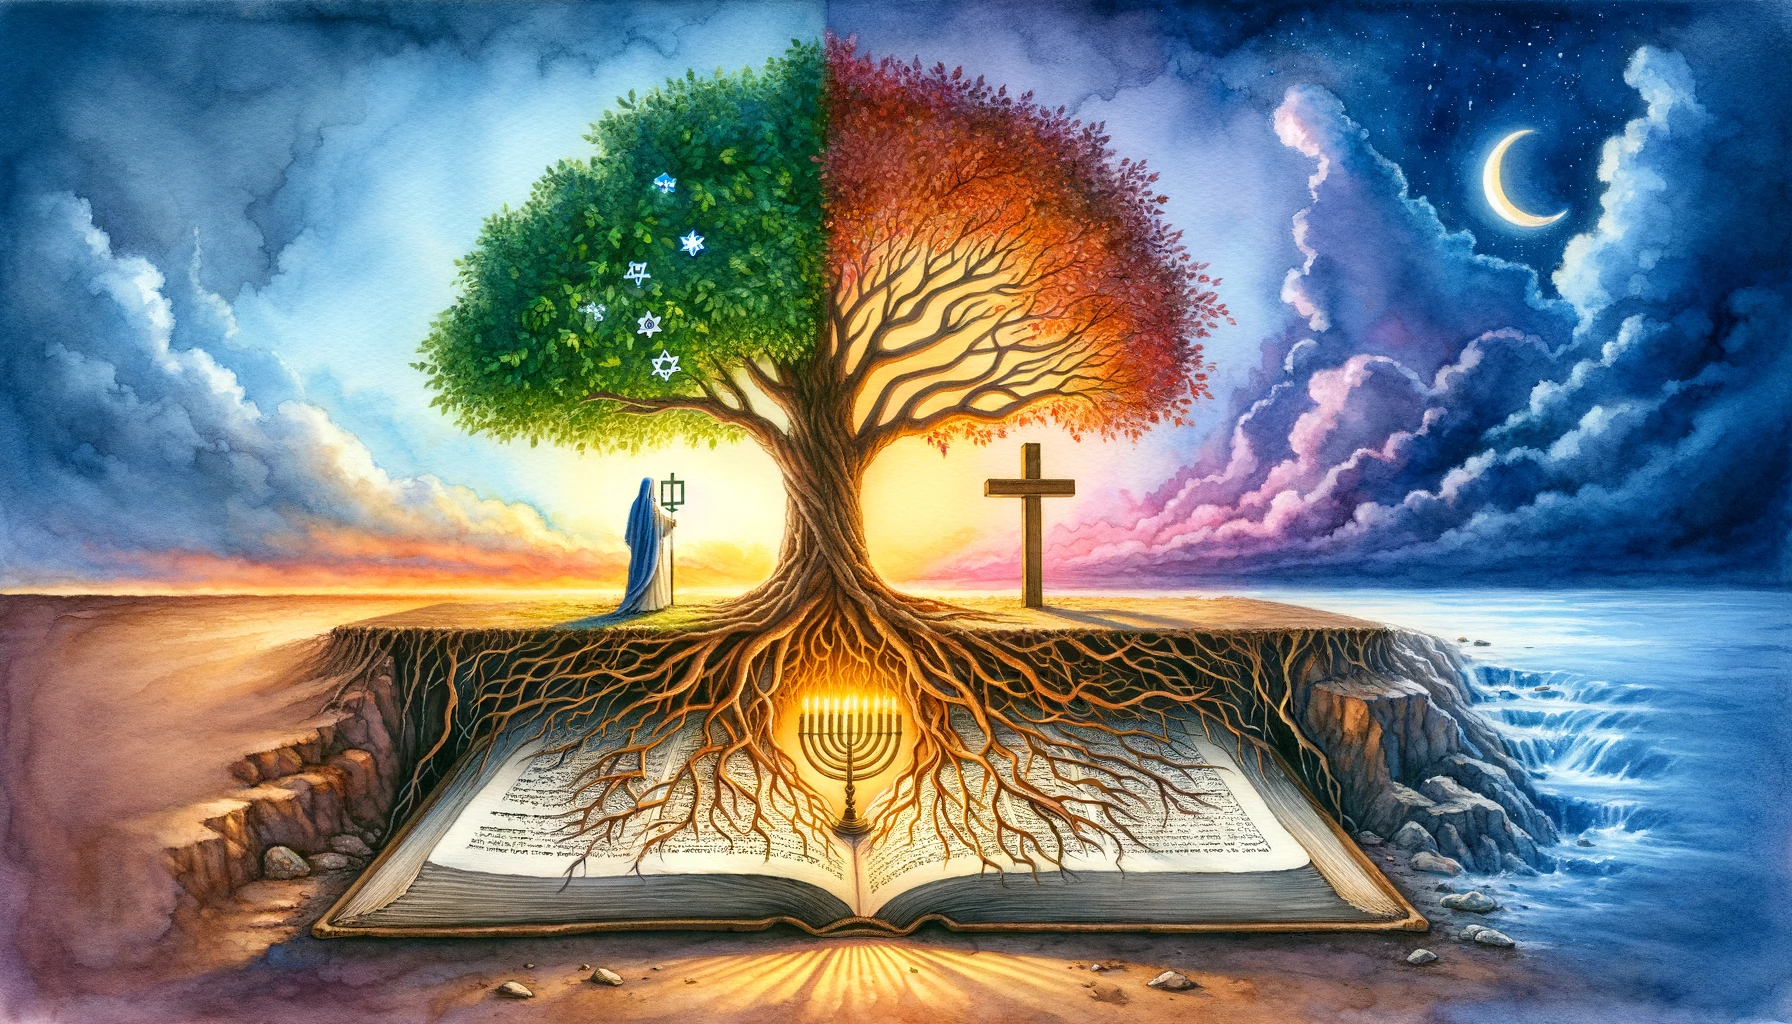 Biblical roots of Christianity and Judaism illustrated through a tree, menorah, and cross.